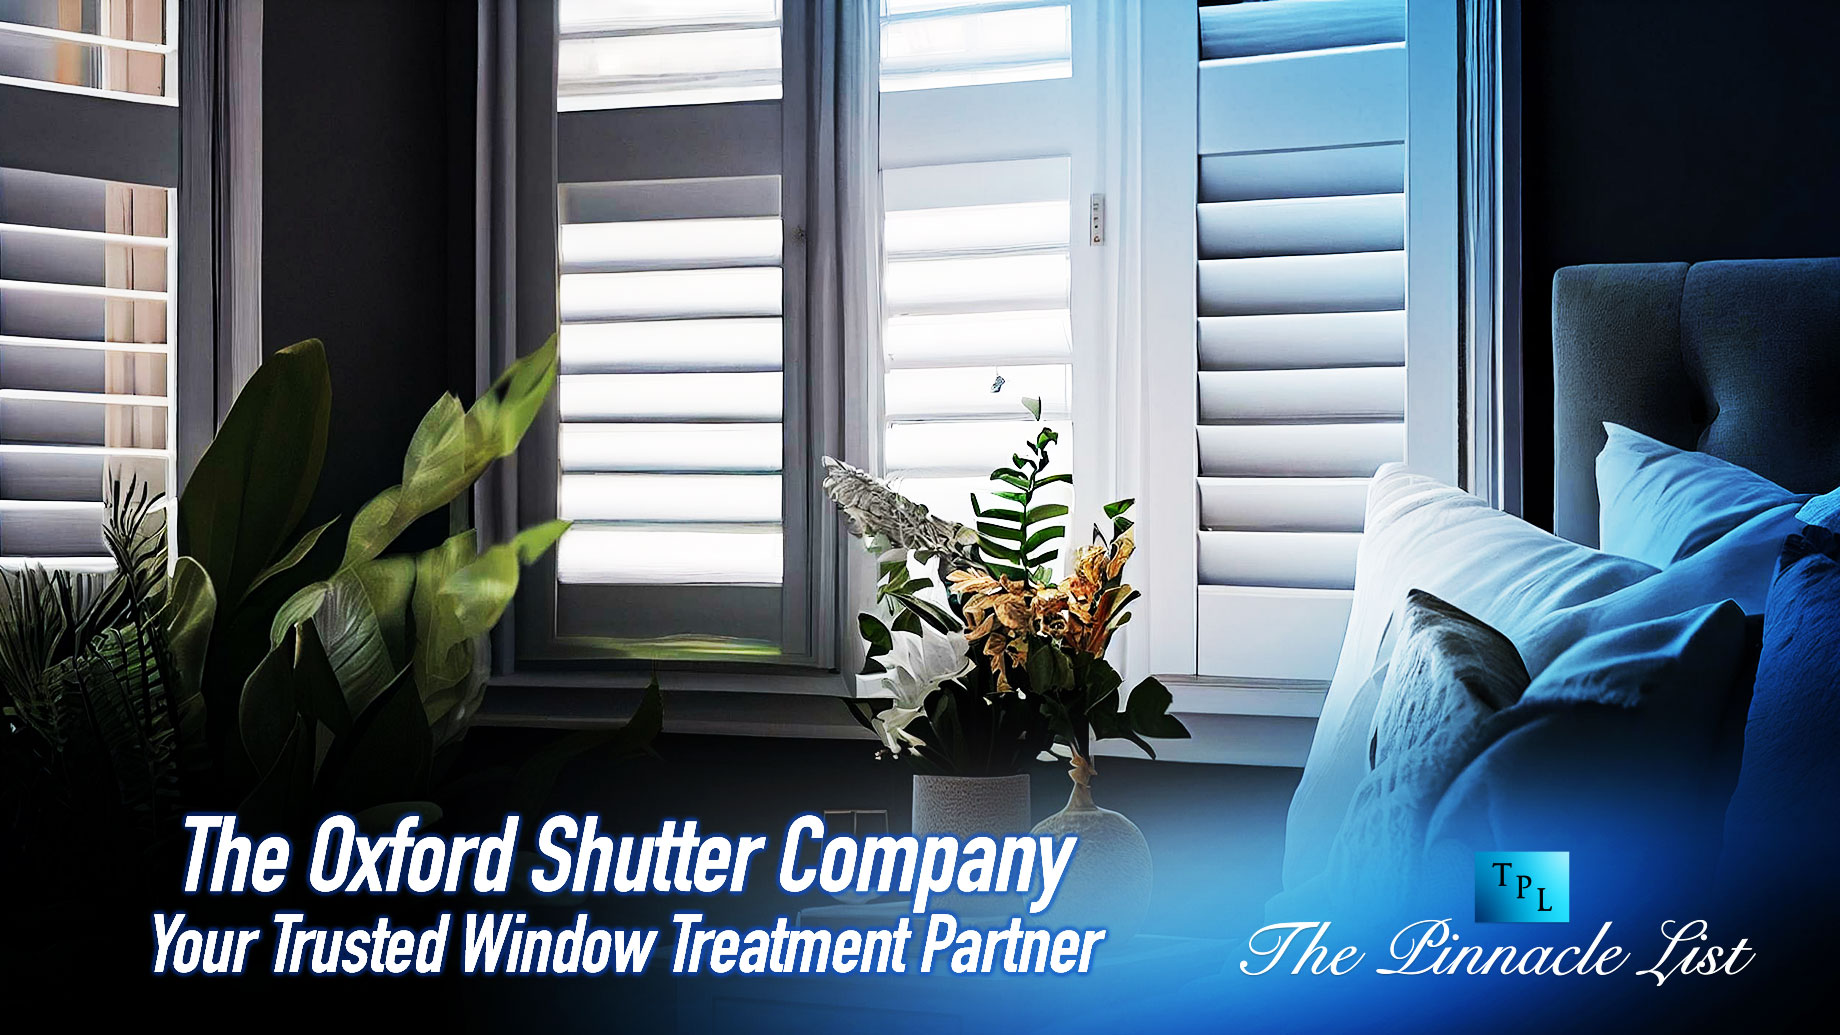 The Oxford Shutter Company: Your Trusted Window Treatment Partner